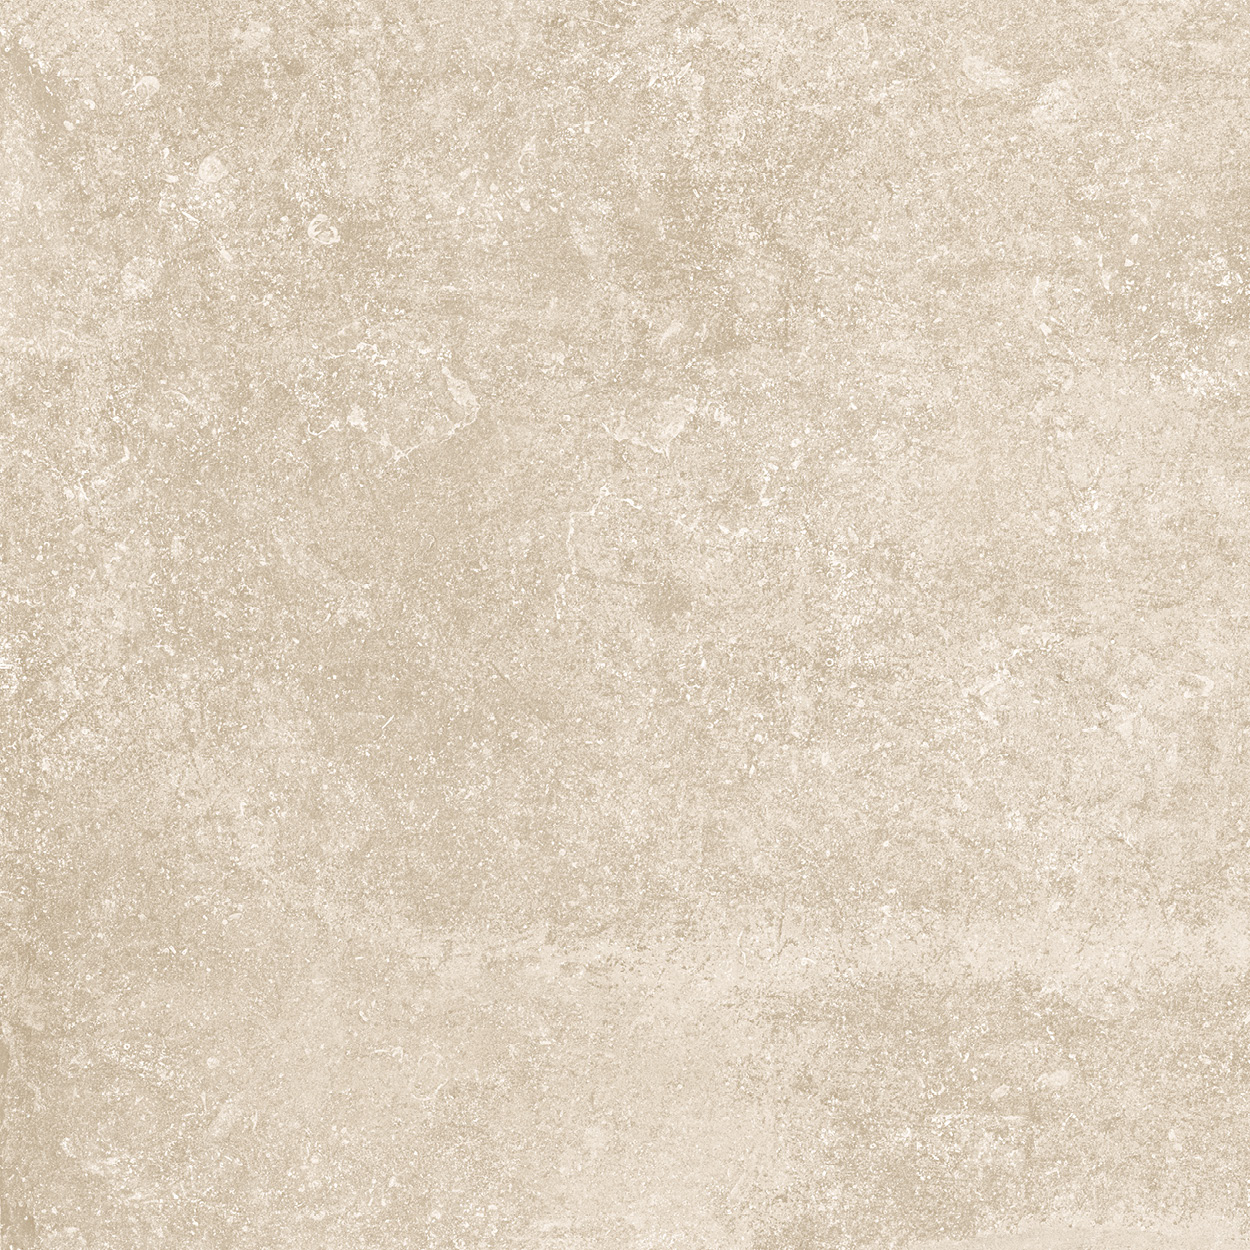 32 X 32 Marwari Clay Rectified Porcelain Tile (SPECIAL ORDER ONLY)